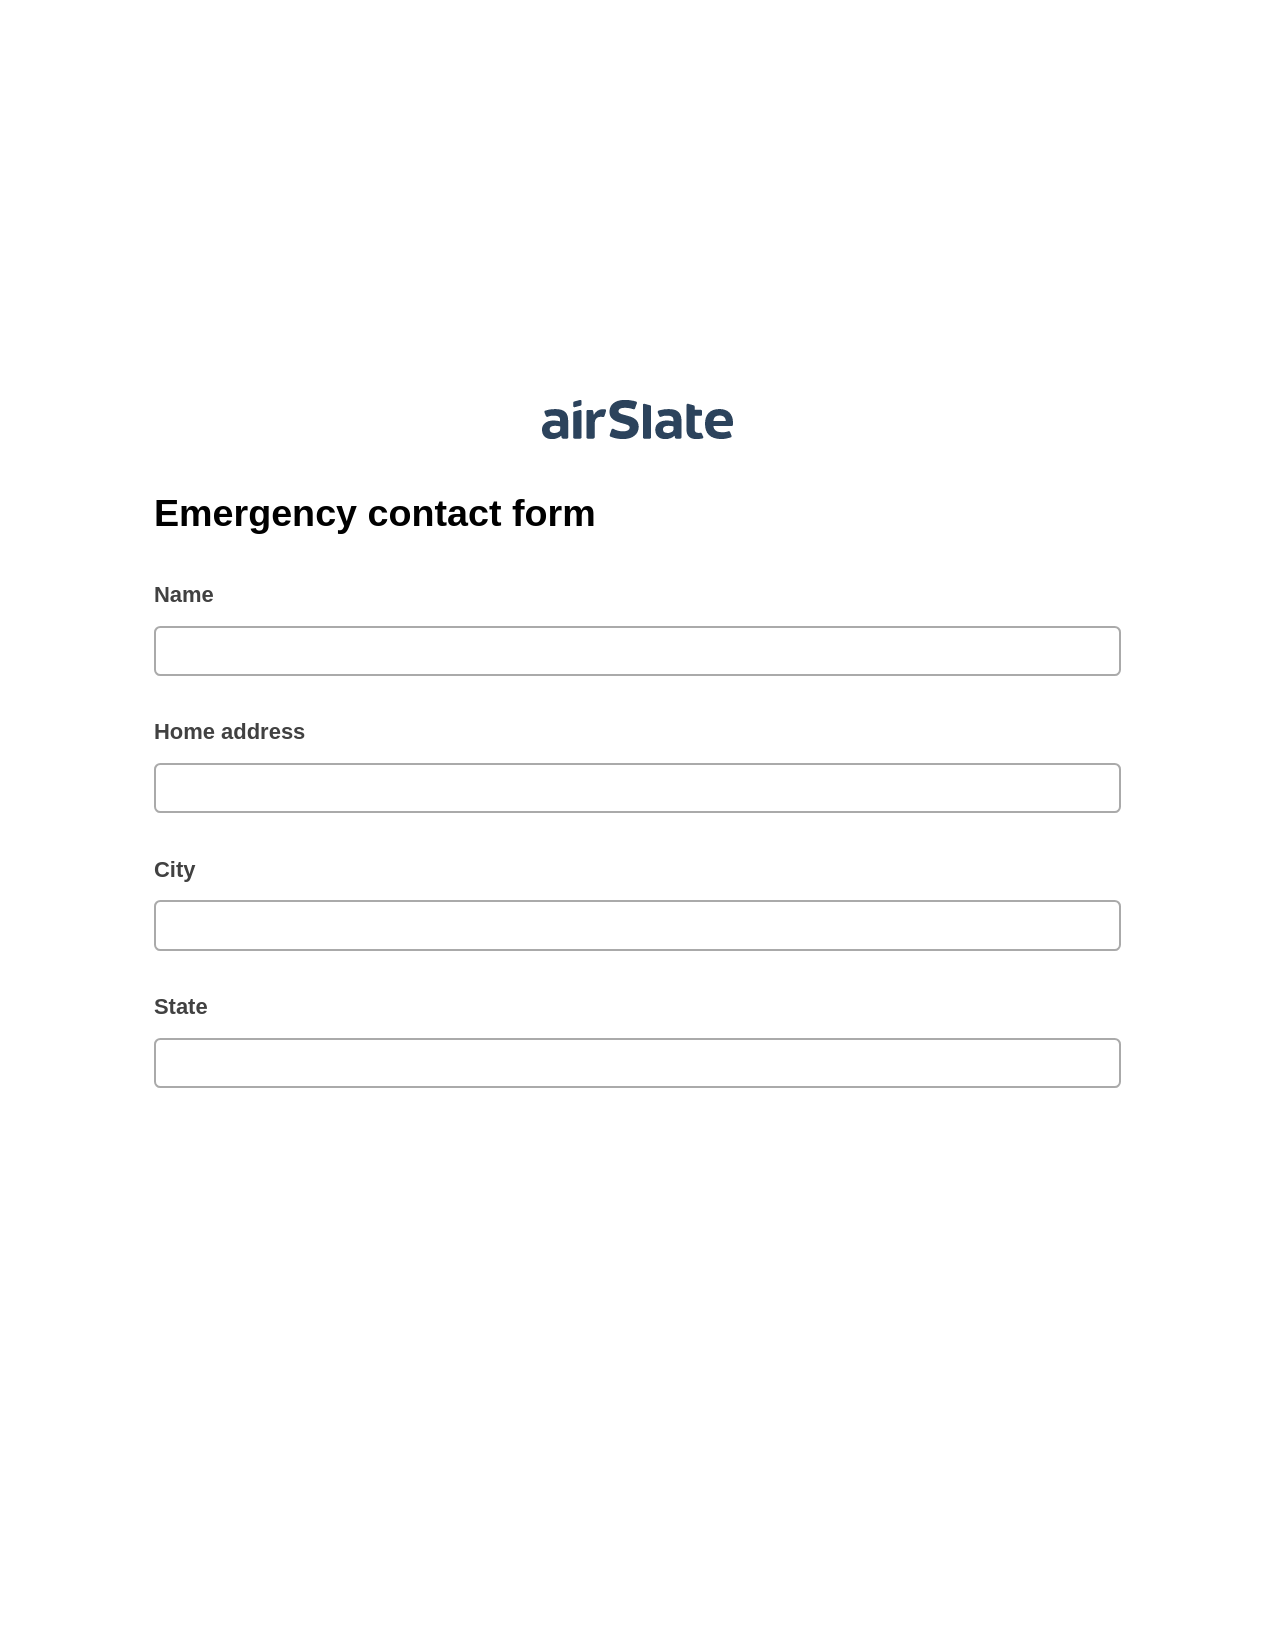 Emergency contact form Pre-fill Slate from MS Dynamics 365 Records Bot, Email Notification Bot, Export to Google Sheet Bot